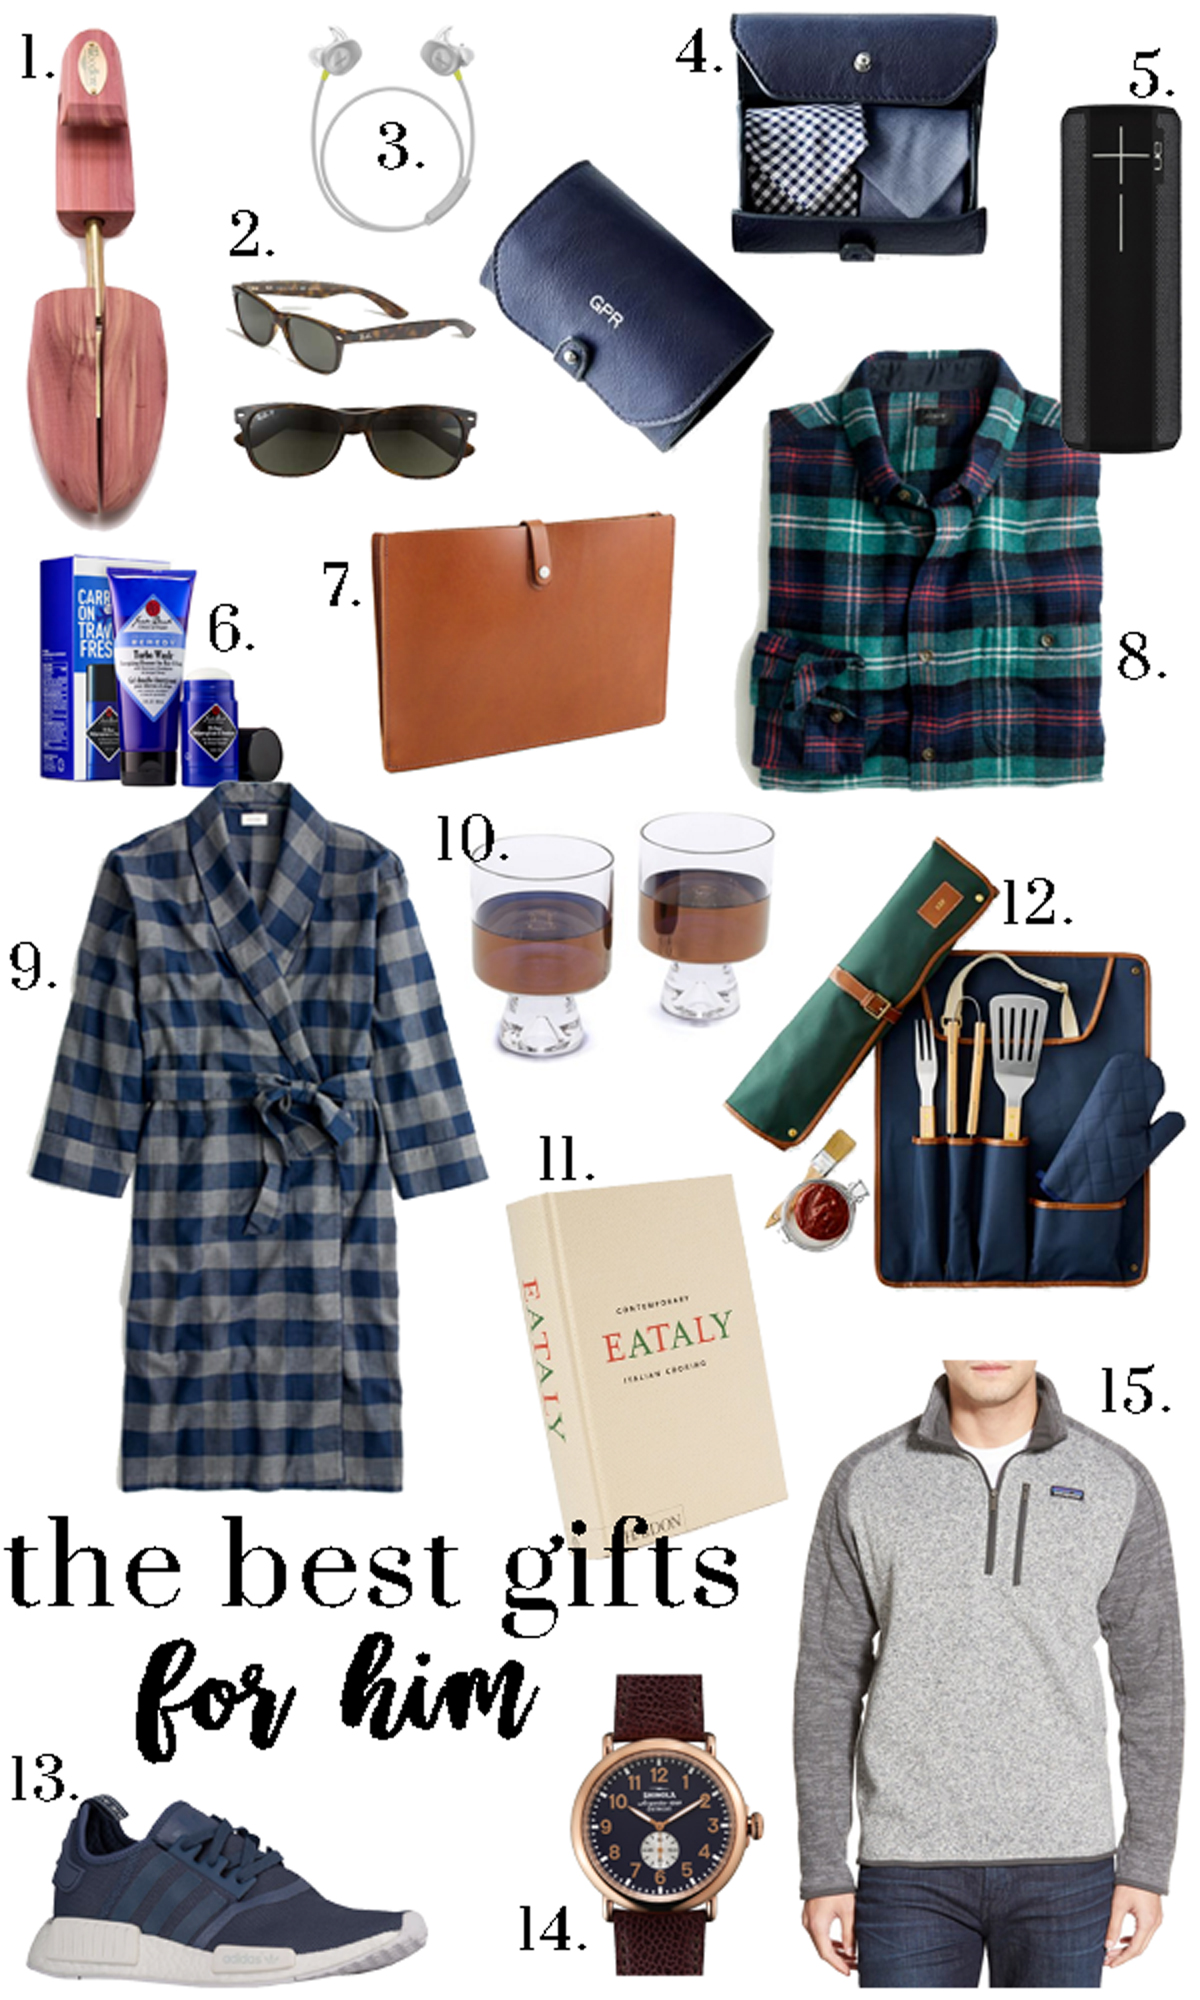 the best gifts for him - Glitter & Gingham